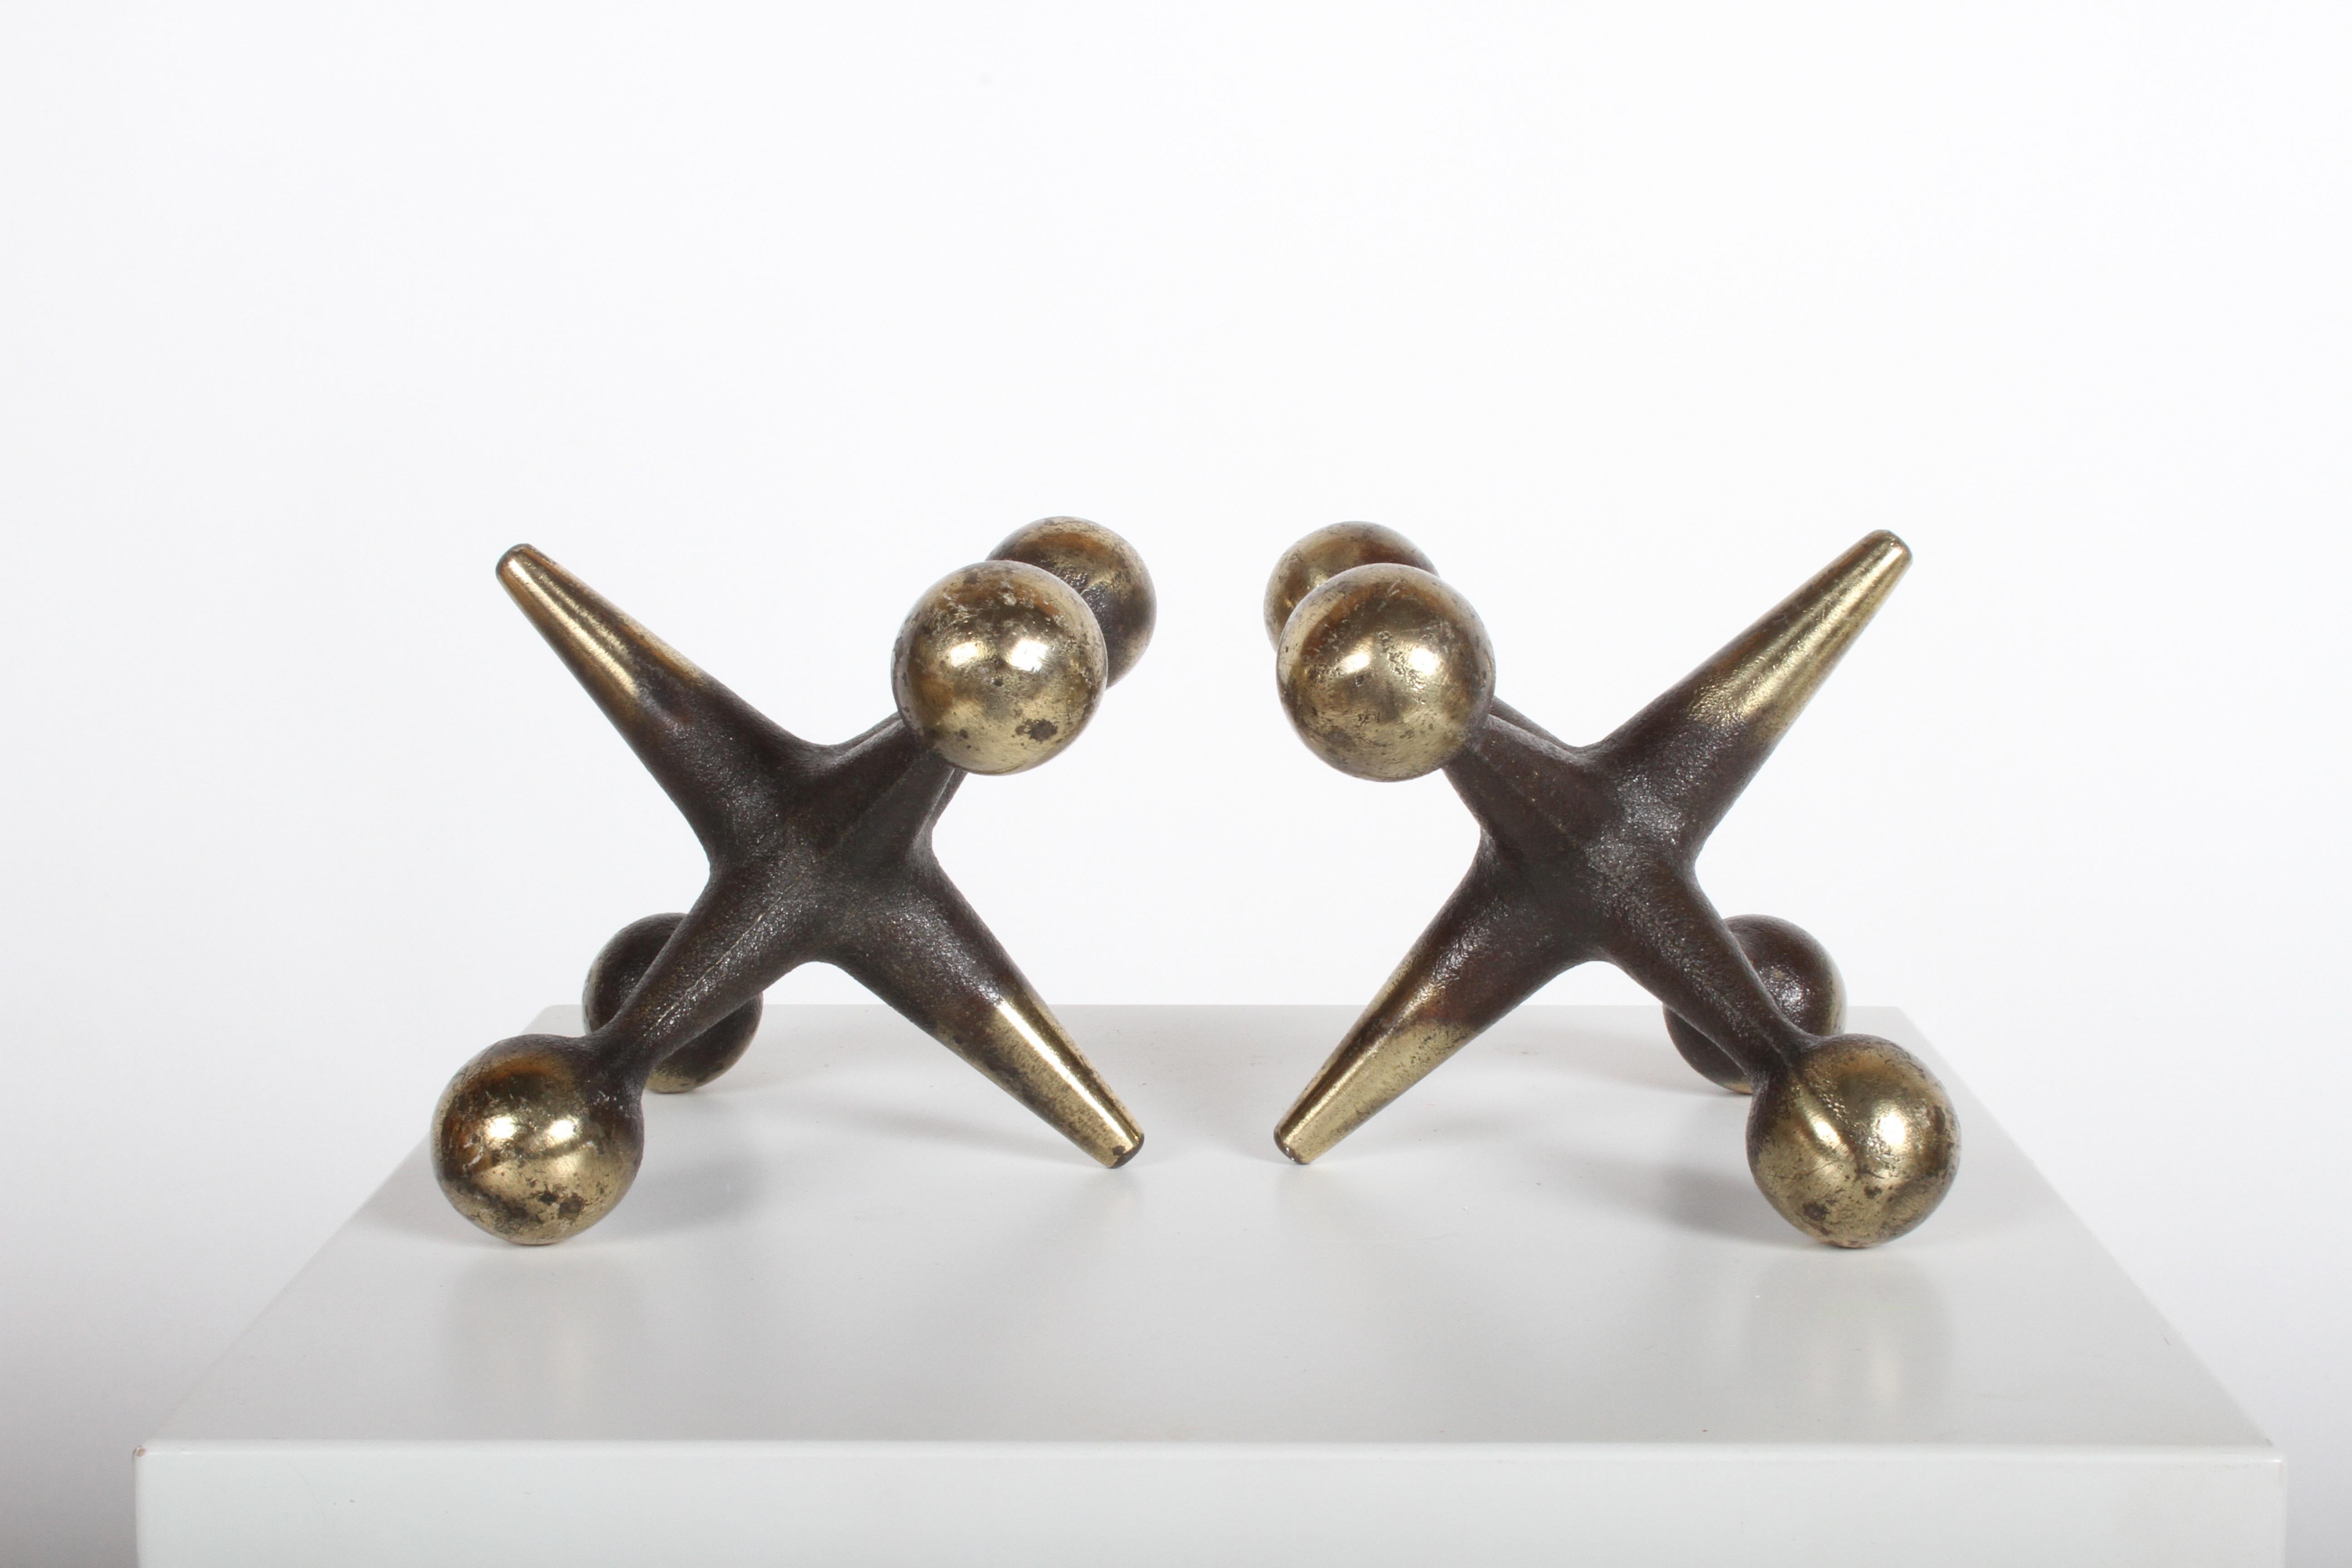 Bill Curry designed iron jacks bookends or decorative objects. Often attributed to George Nelson, these are all original, black with brass ends.